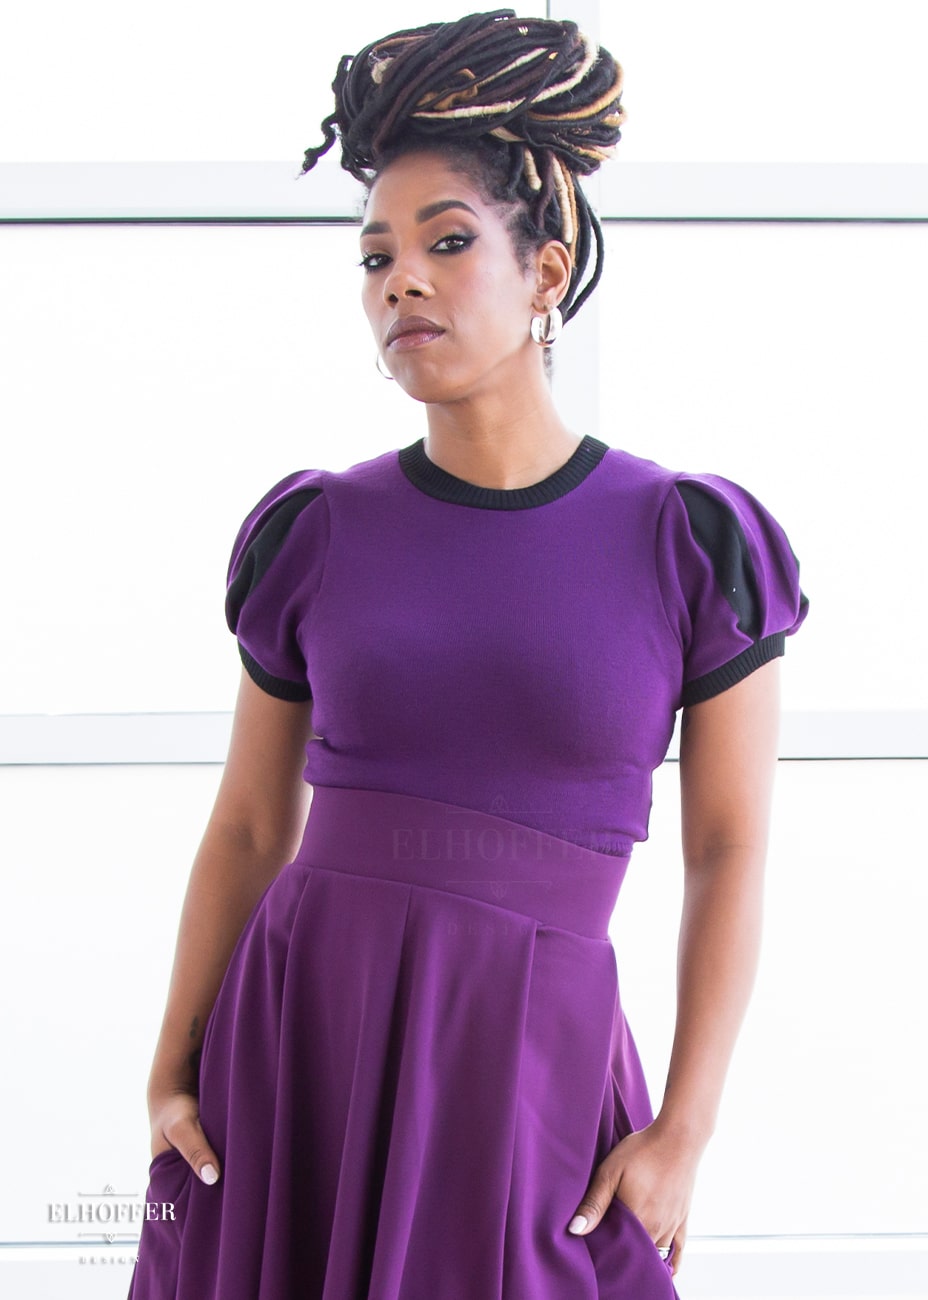 Krystina, a medium dark skinned S model with long braids in an updo, is wearing a purple knit short sleeve crop top with black ribbing along neckline and cuffs.  The sleeves are split puff sleeves with alternating colors of purple and black. She paired the knit top with a plum skater skirt.